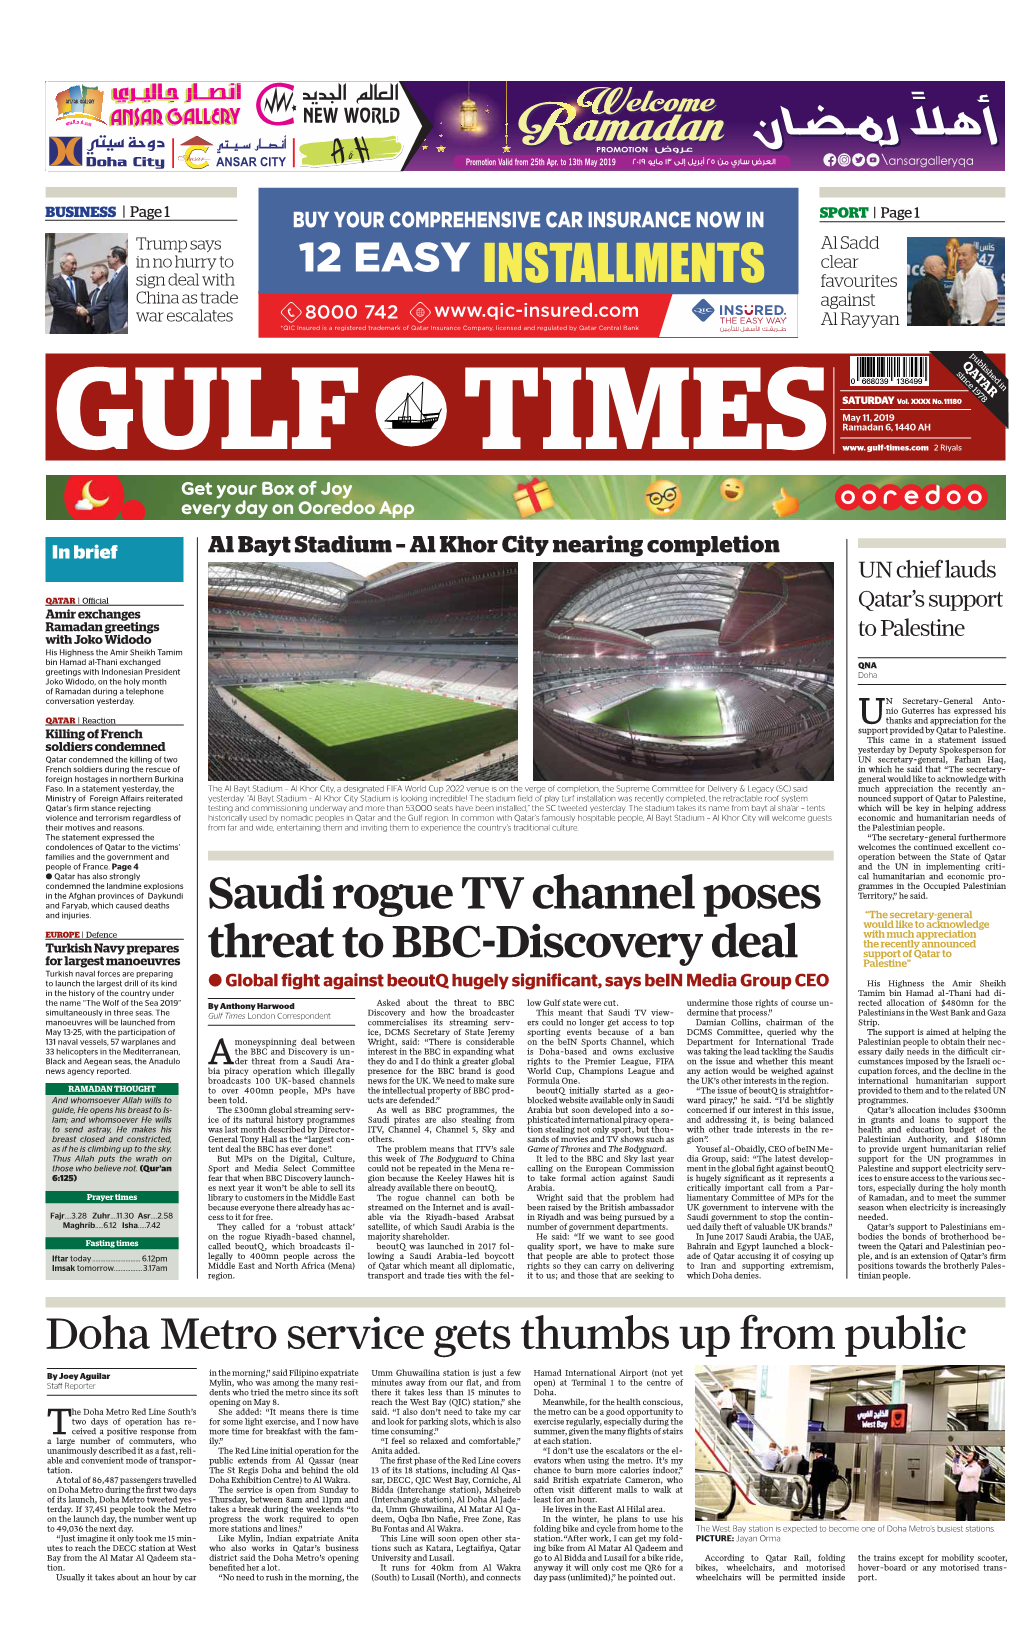 Saudi Rogue TV Channel Poses Threat to BBC-Discovery Deal